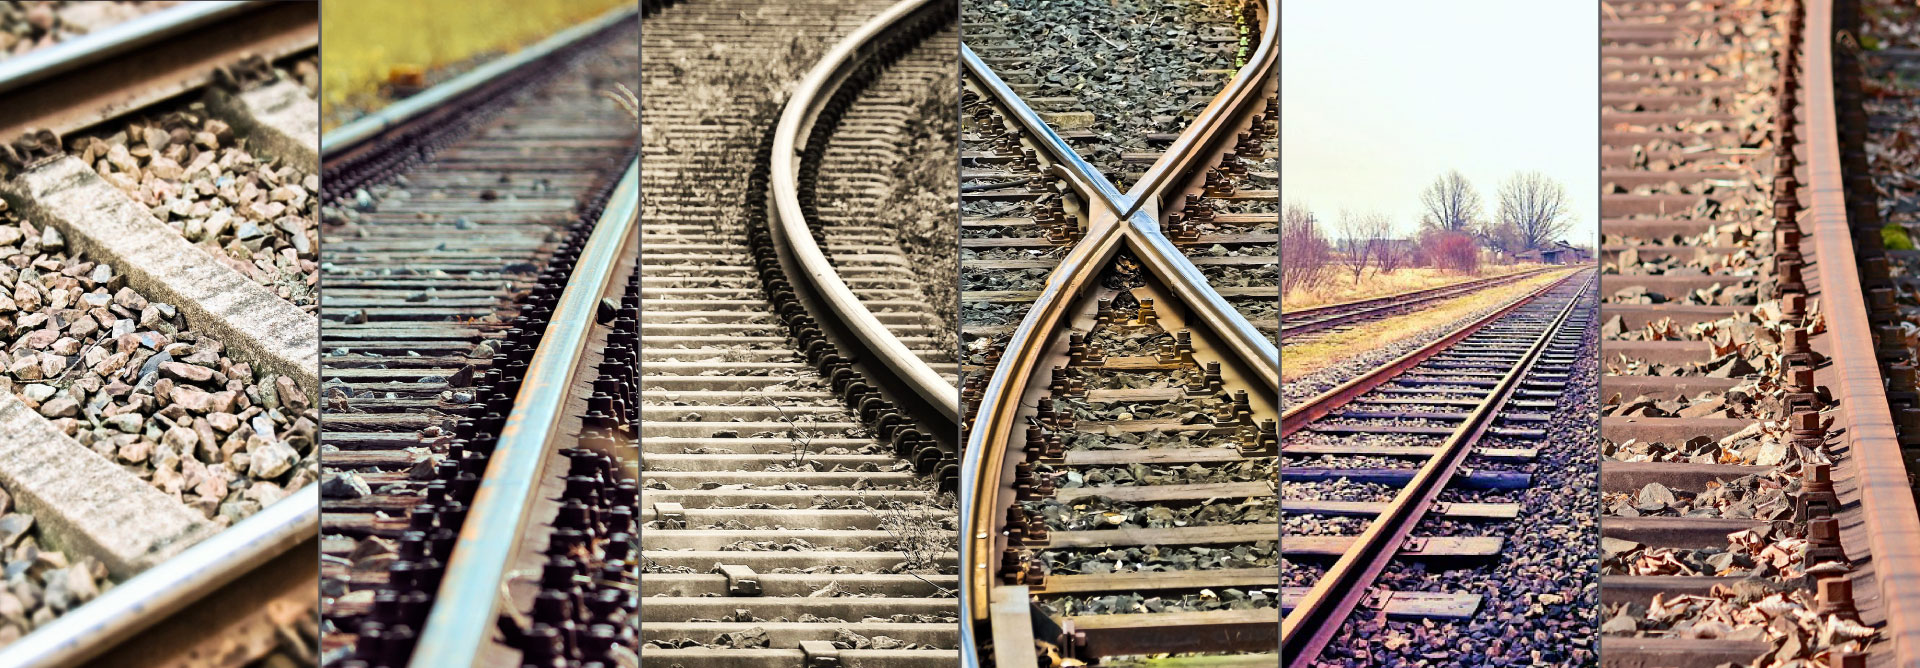 Images of crisscrossing rail tracks signifying performance transformation through strategy strengthening